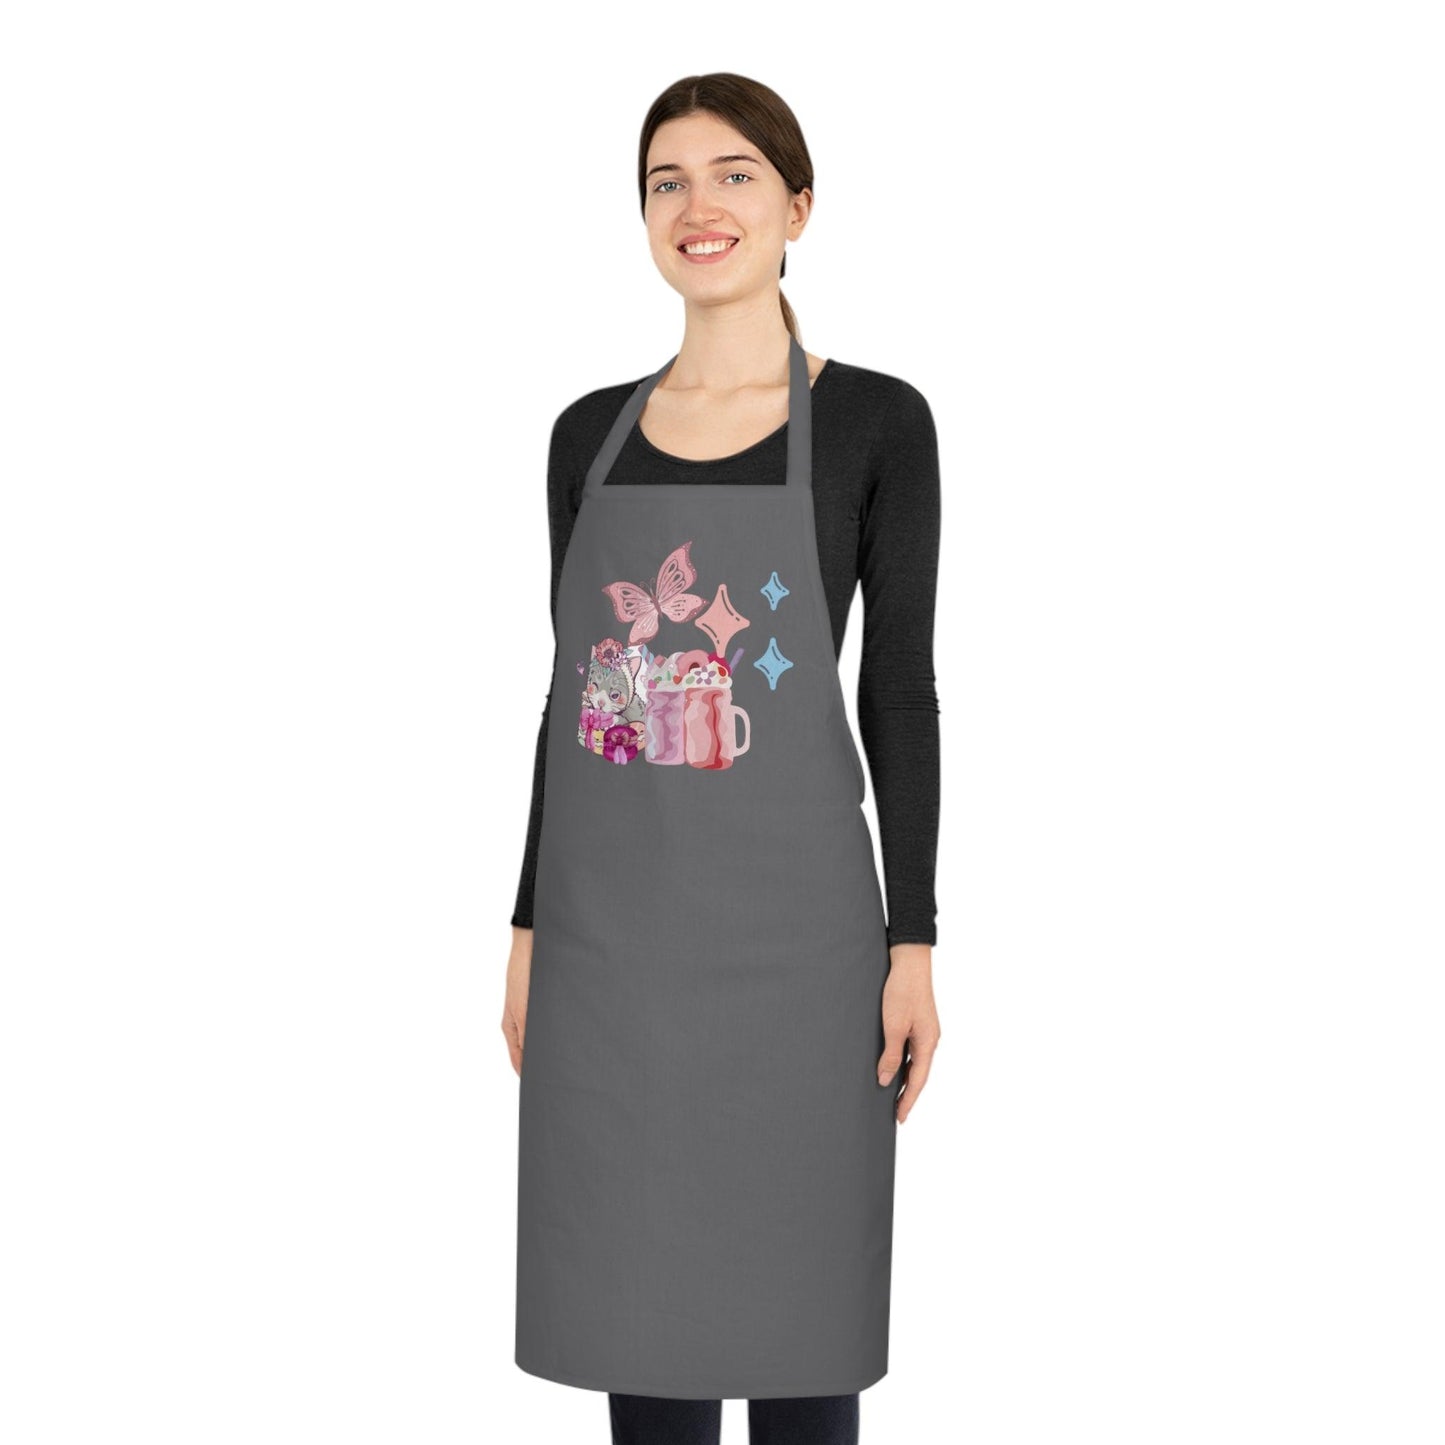 Cute Adult Cafe Kitchen Apron - COFFEEBRE